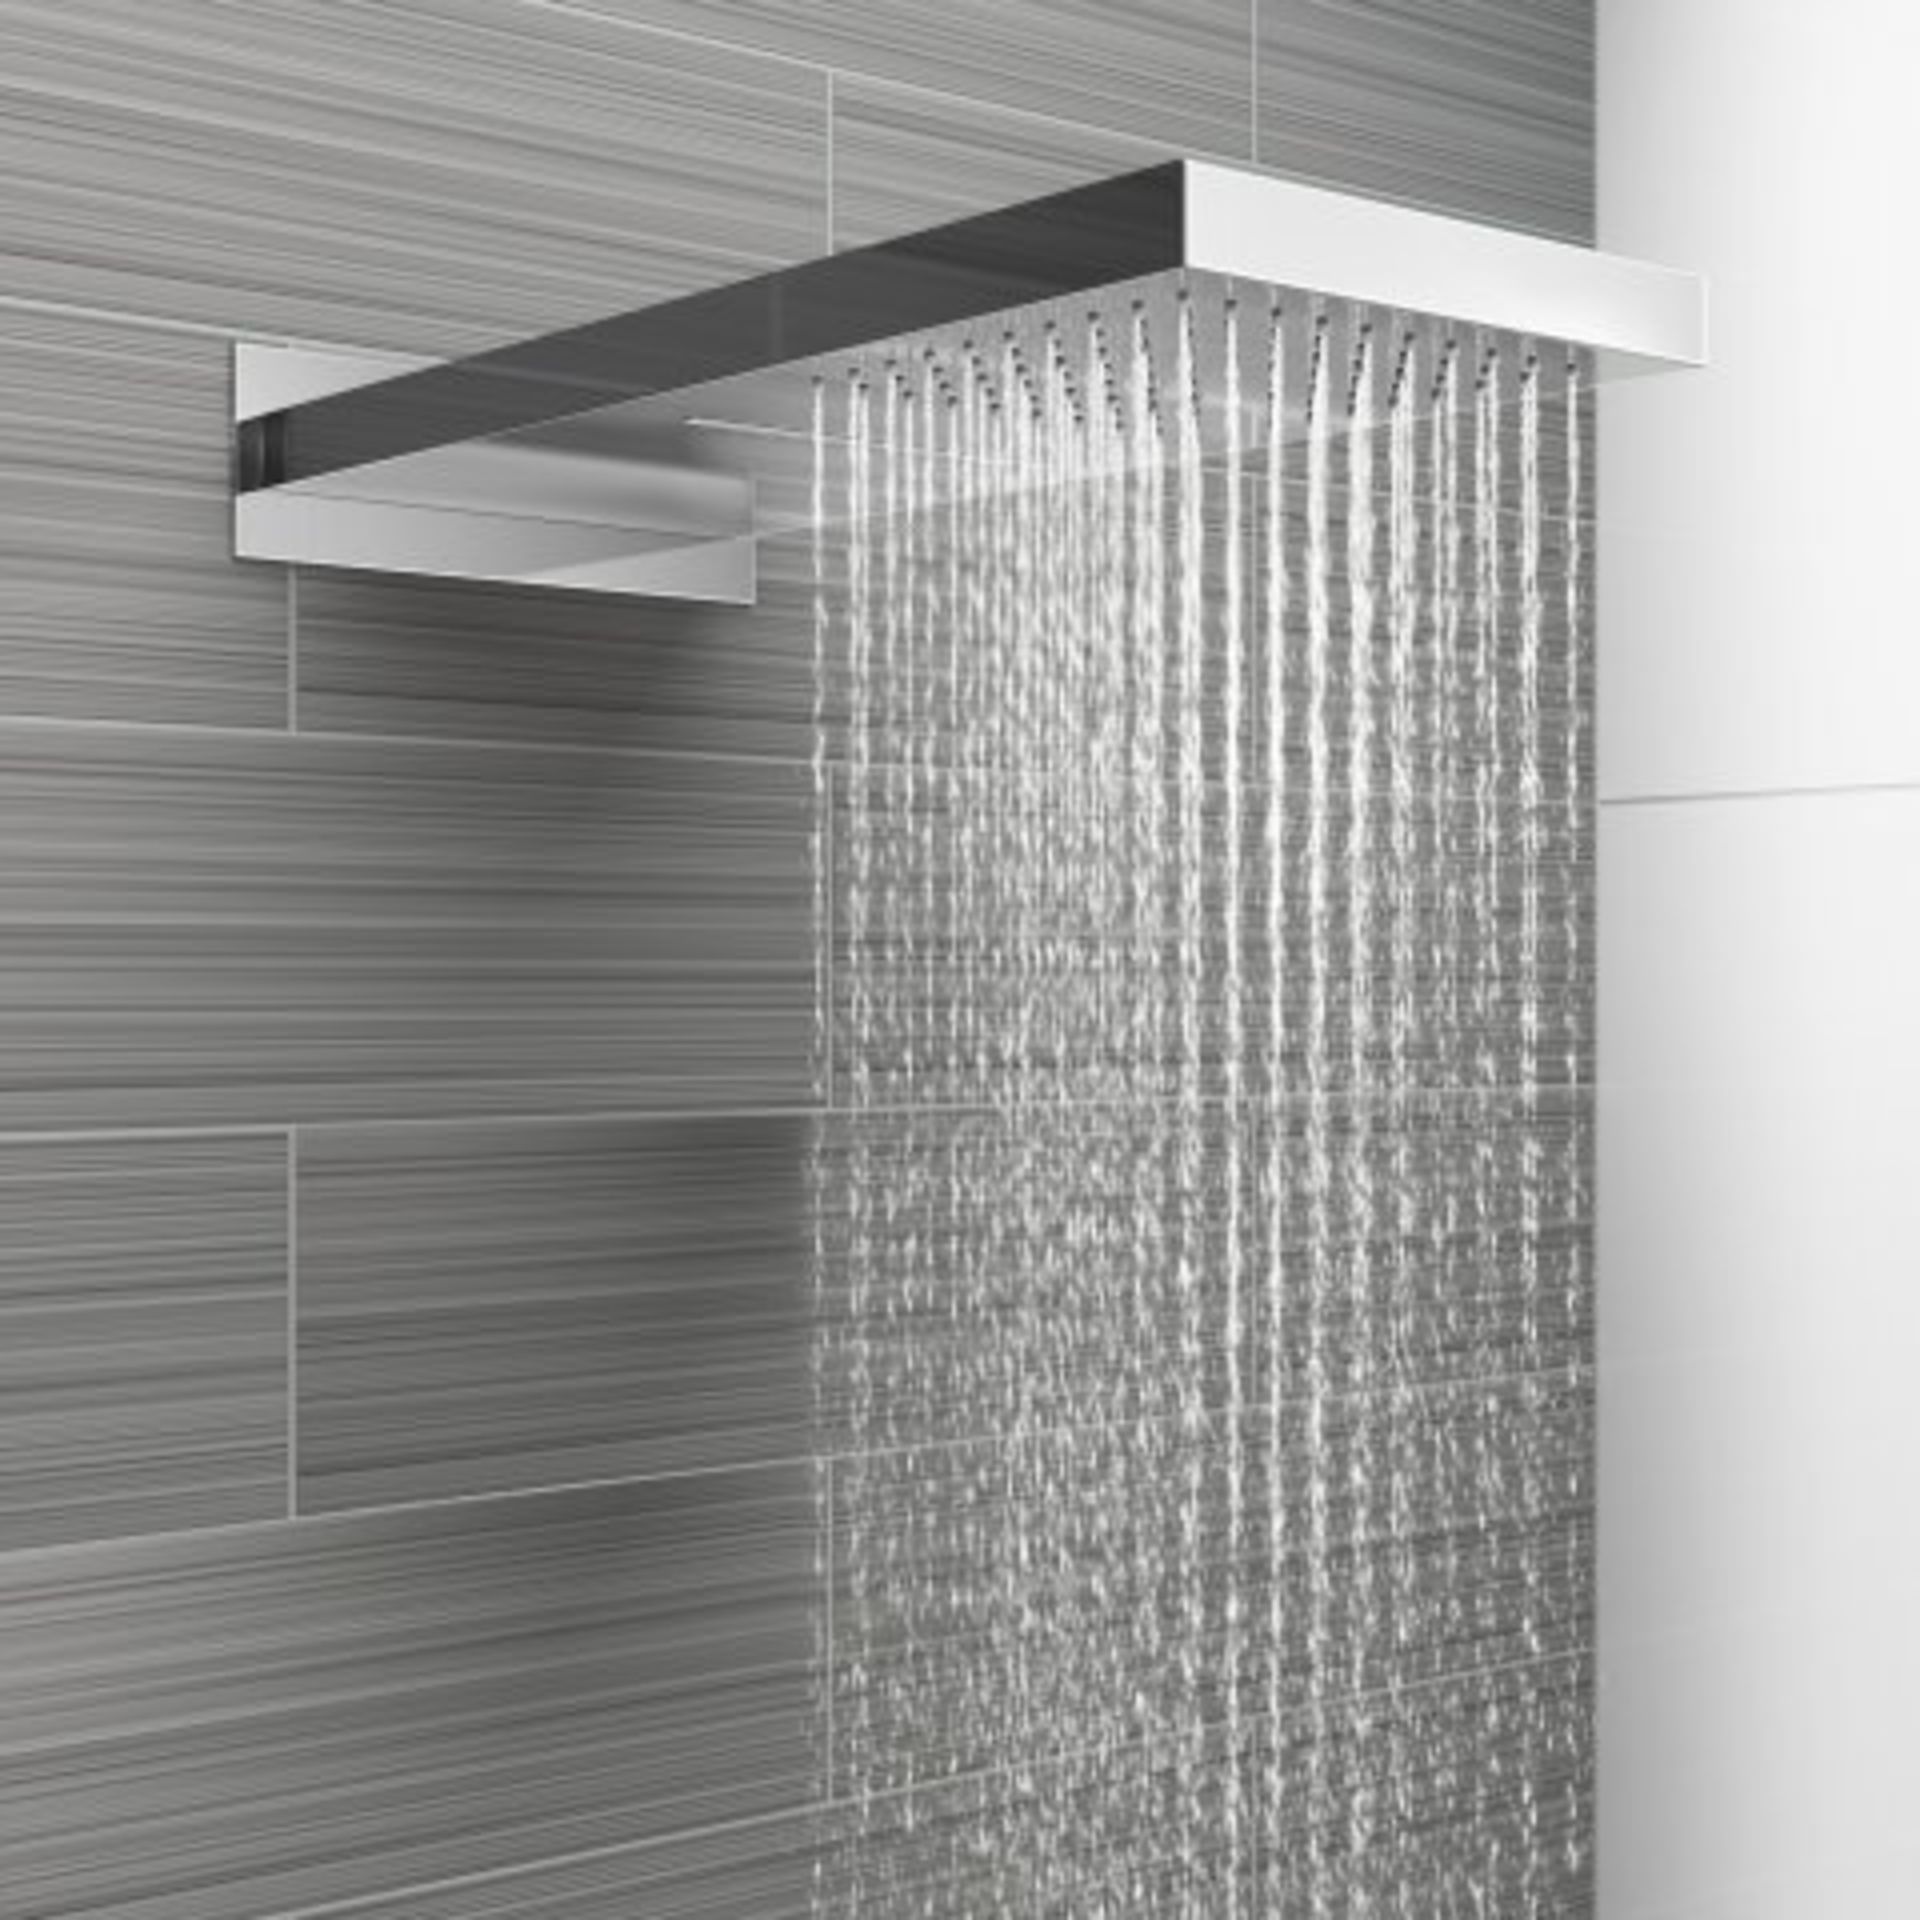 (H241) Stainless Steel 200x550mm Waterfall Shower Head RRP £449.99 "What An Experience": Enjoy - Image 3 of 4